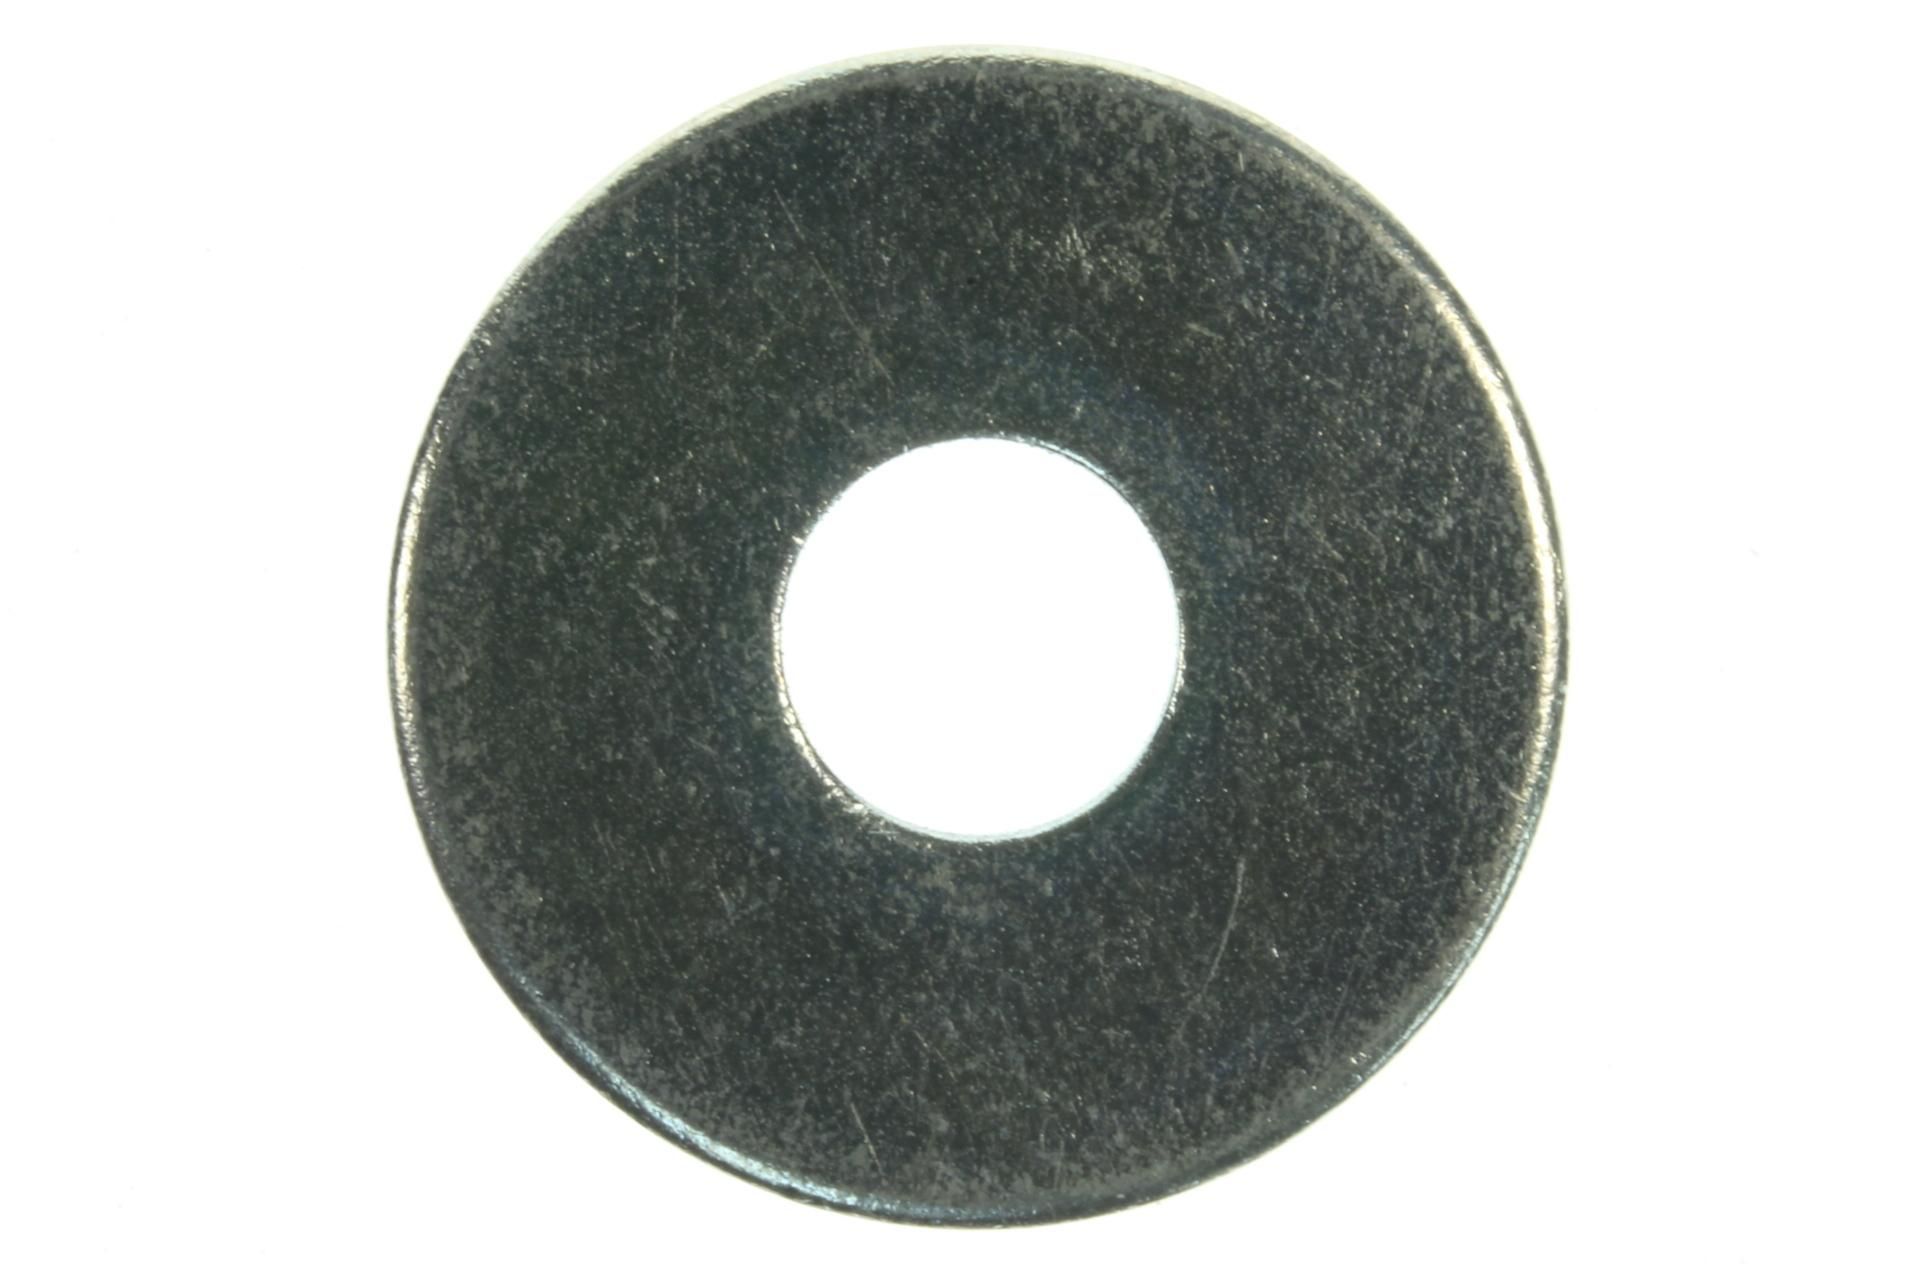 09160-06102 Superseded by 09160-06088 - WASHER 6.5X20X1